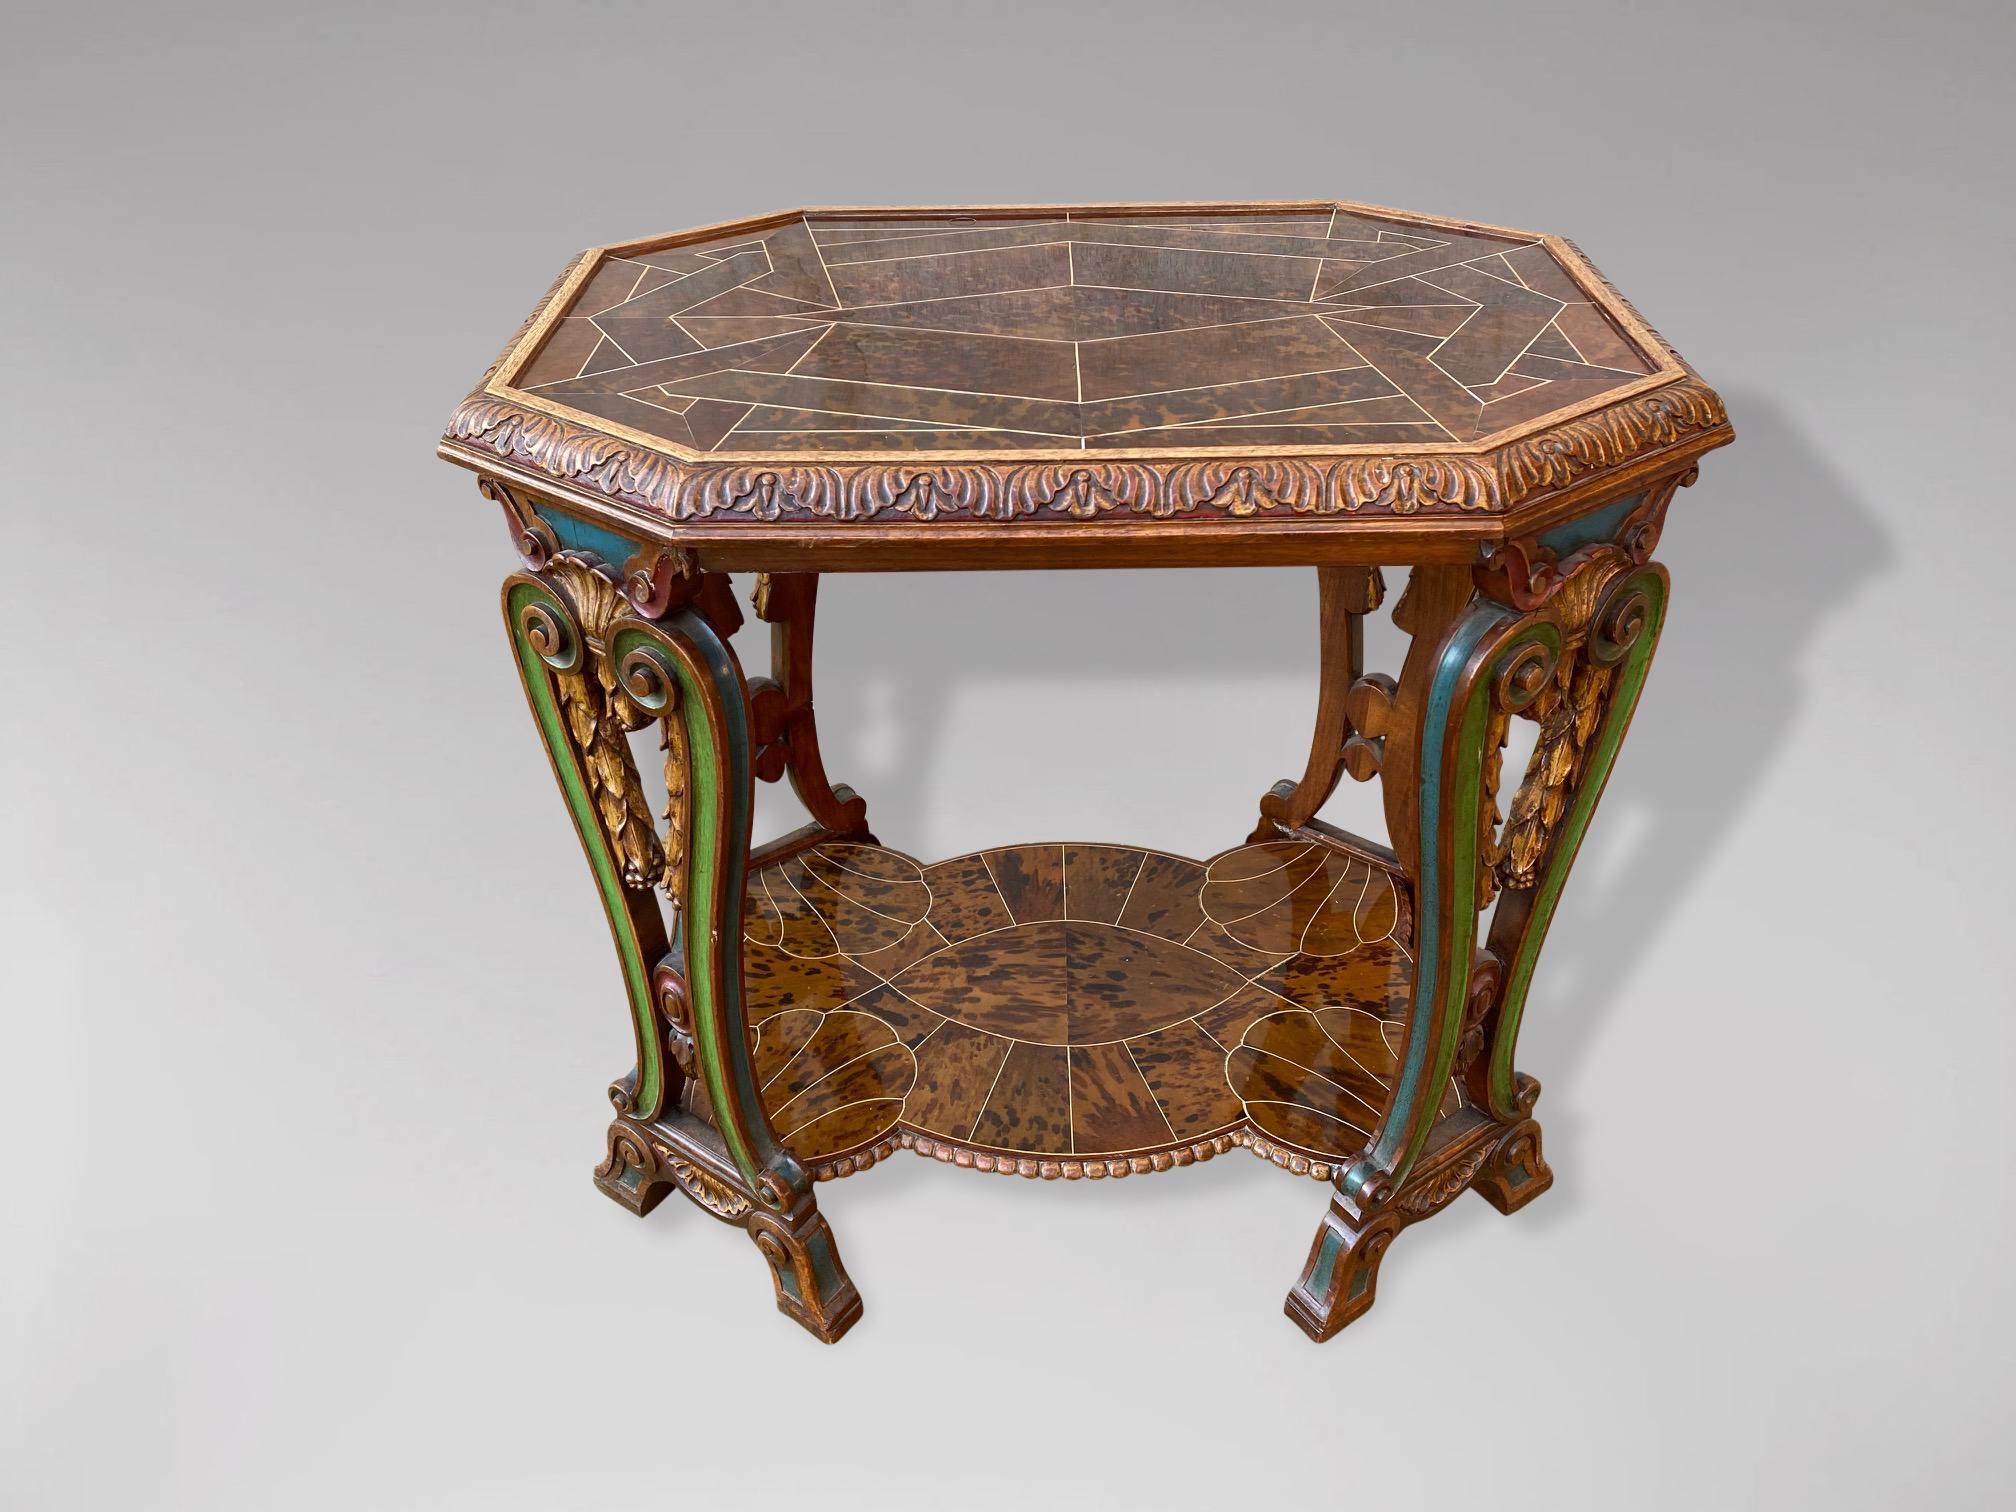 A stunning quality 20th century Art Deco occasional table of Maison Franck in Antwerp. A tortoiseshell veneered and ivorine inlaid parcel-gilt wood tops, top covered with glass. Attributed to Maison Franck, Antwerp Belgium circa 1920.
Top quality!